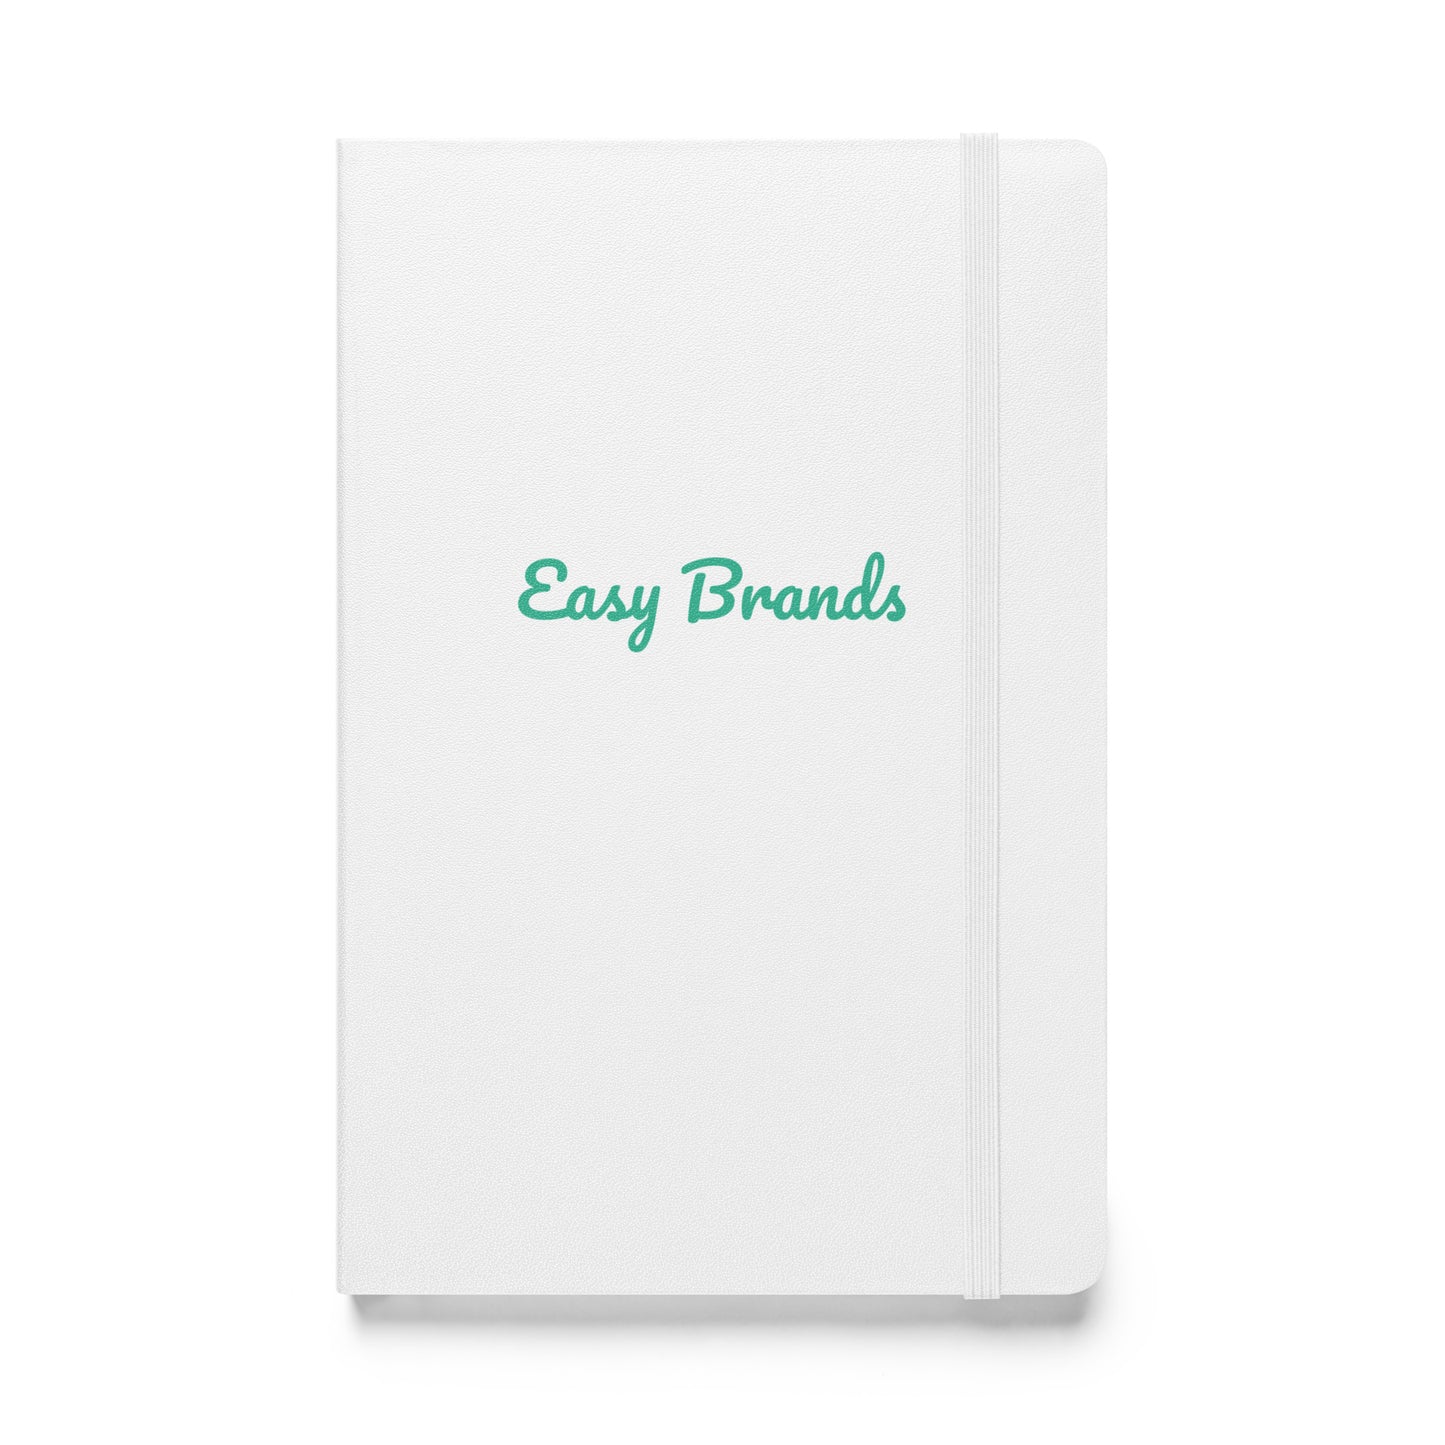 Hardcover bound notebook (ruled line)